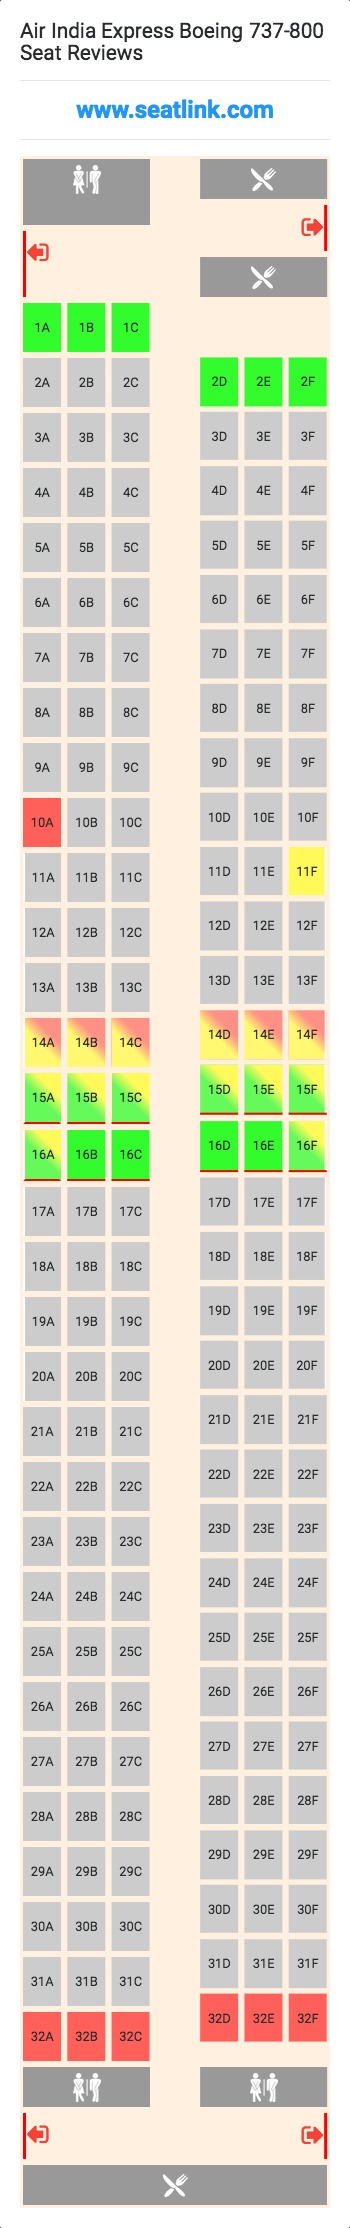 Air India Express Boeing 737-800 (738) Seat Map